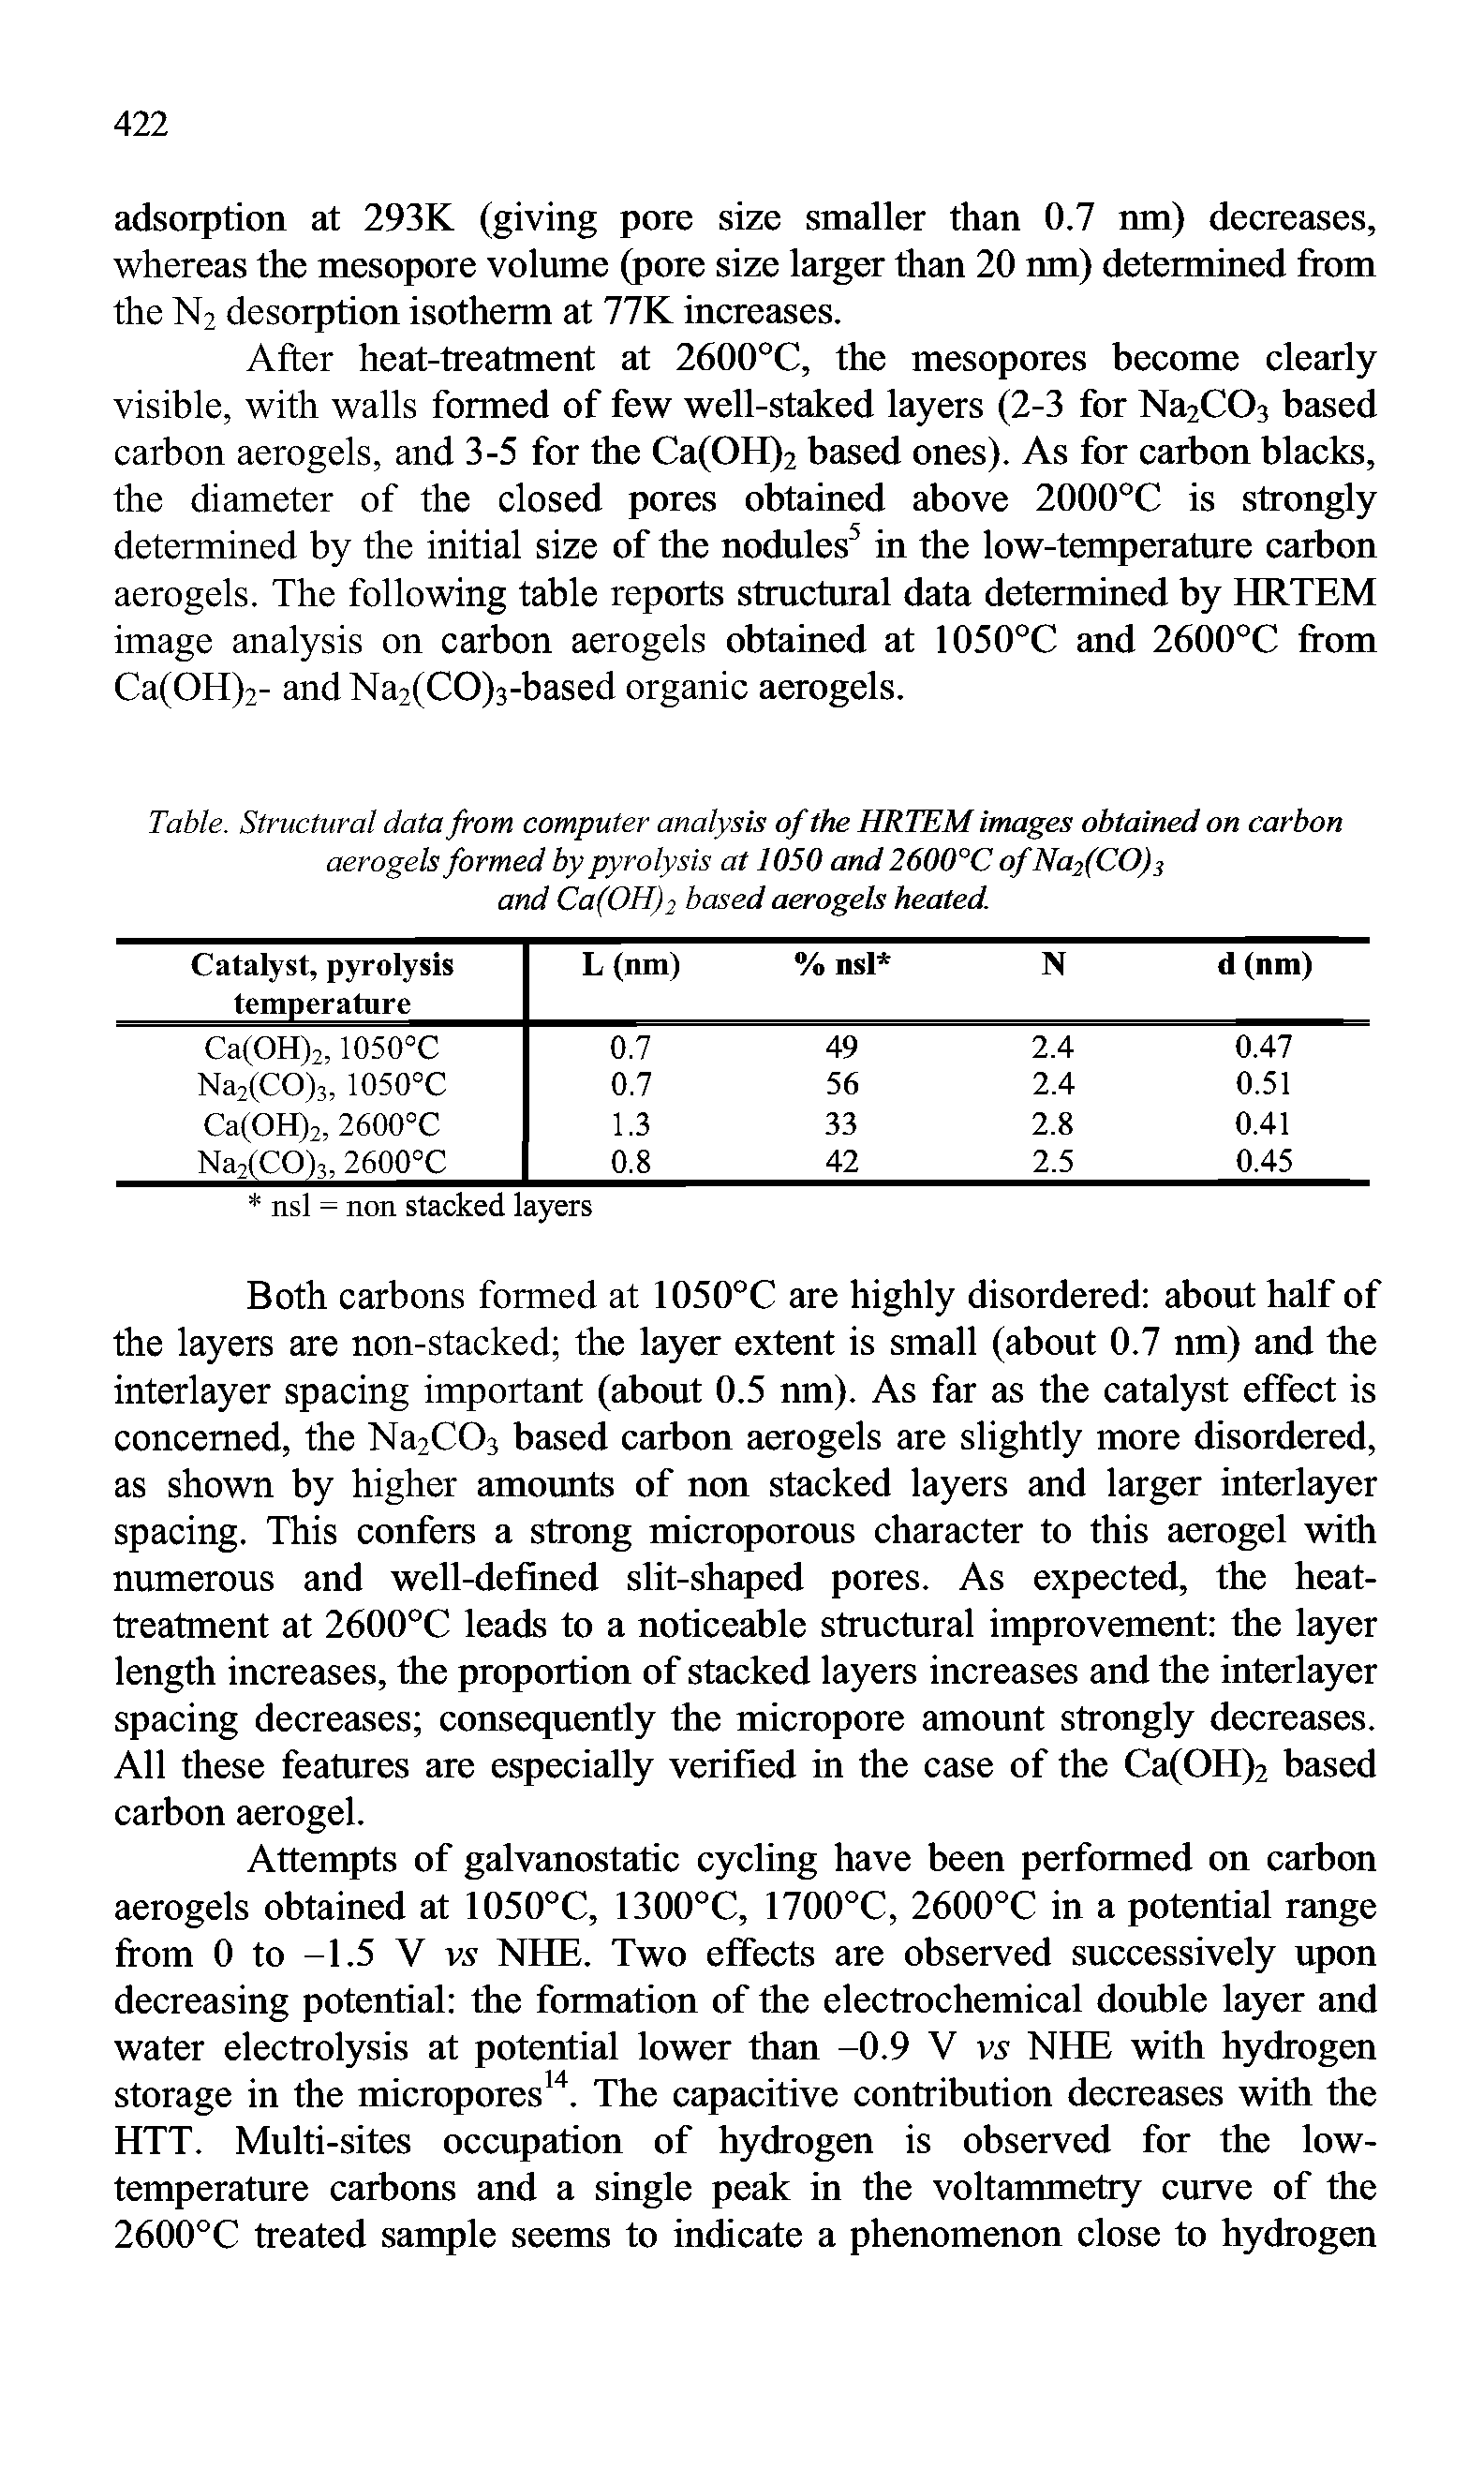 Table. Structural data from computer analysis of the HRTEM images obtained on carbon aerogels formed by pyrolysis at 1050 and 2600°C ofNa2(CO)3 and Ca(OH)2 based aerogels heated.